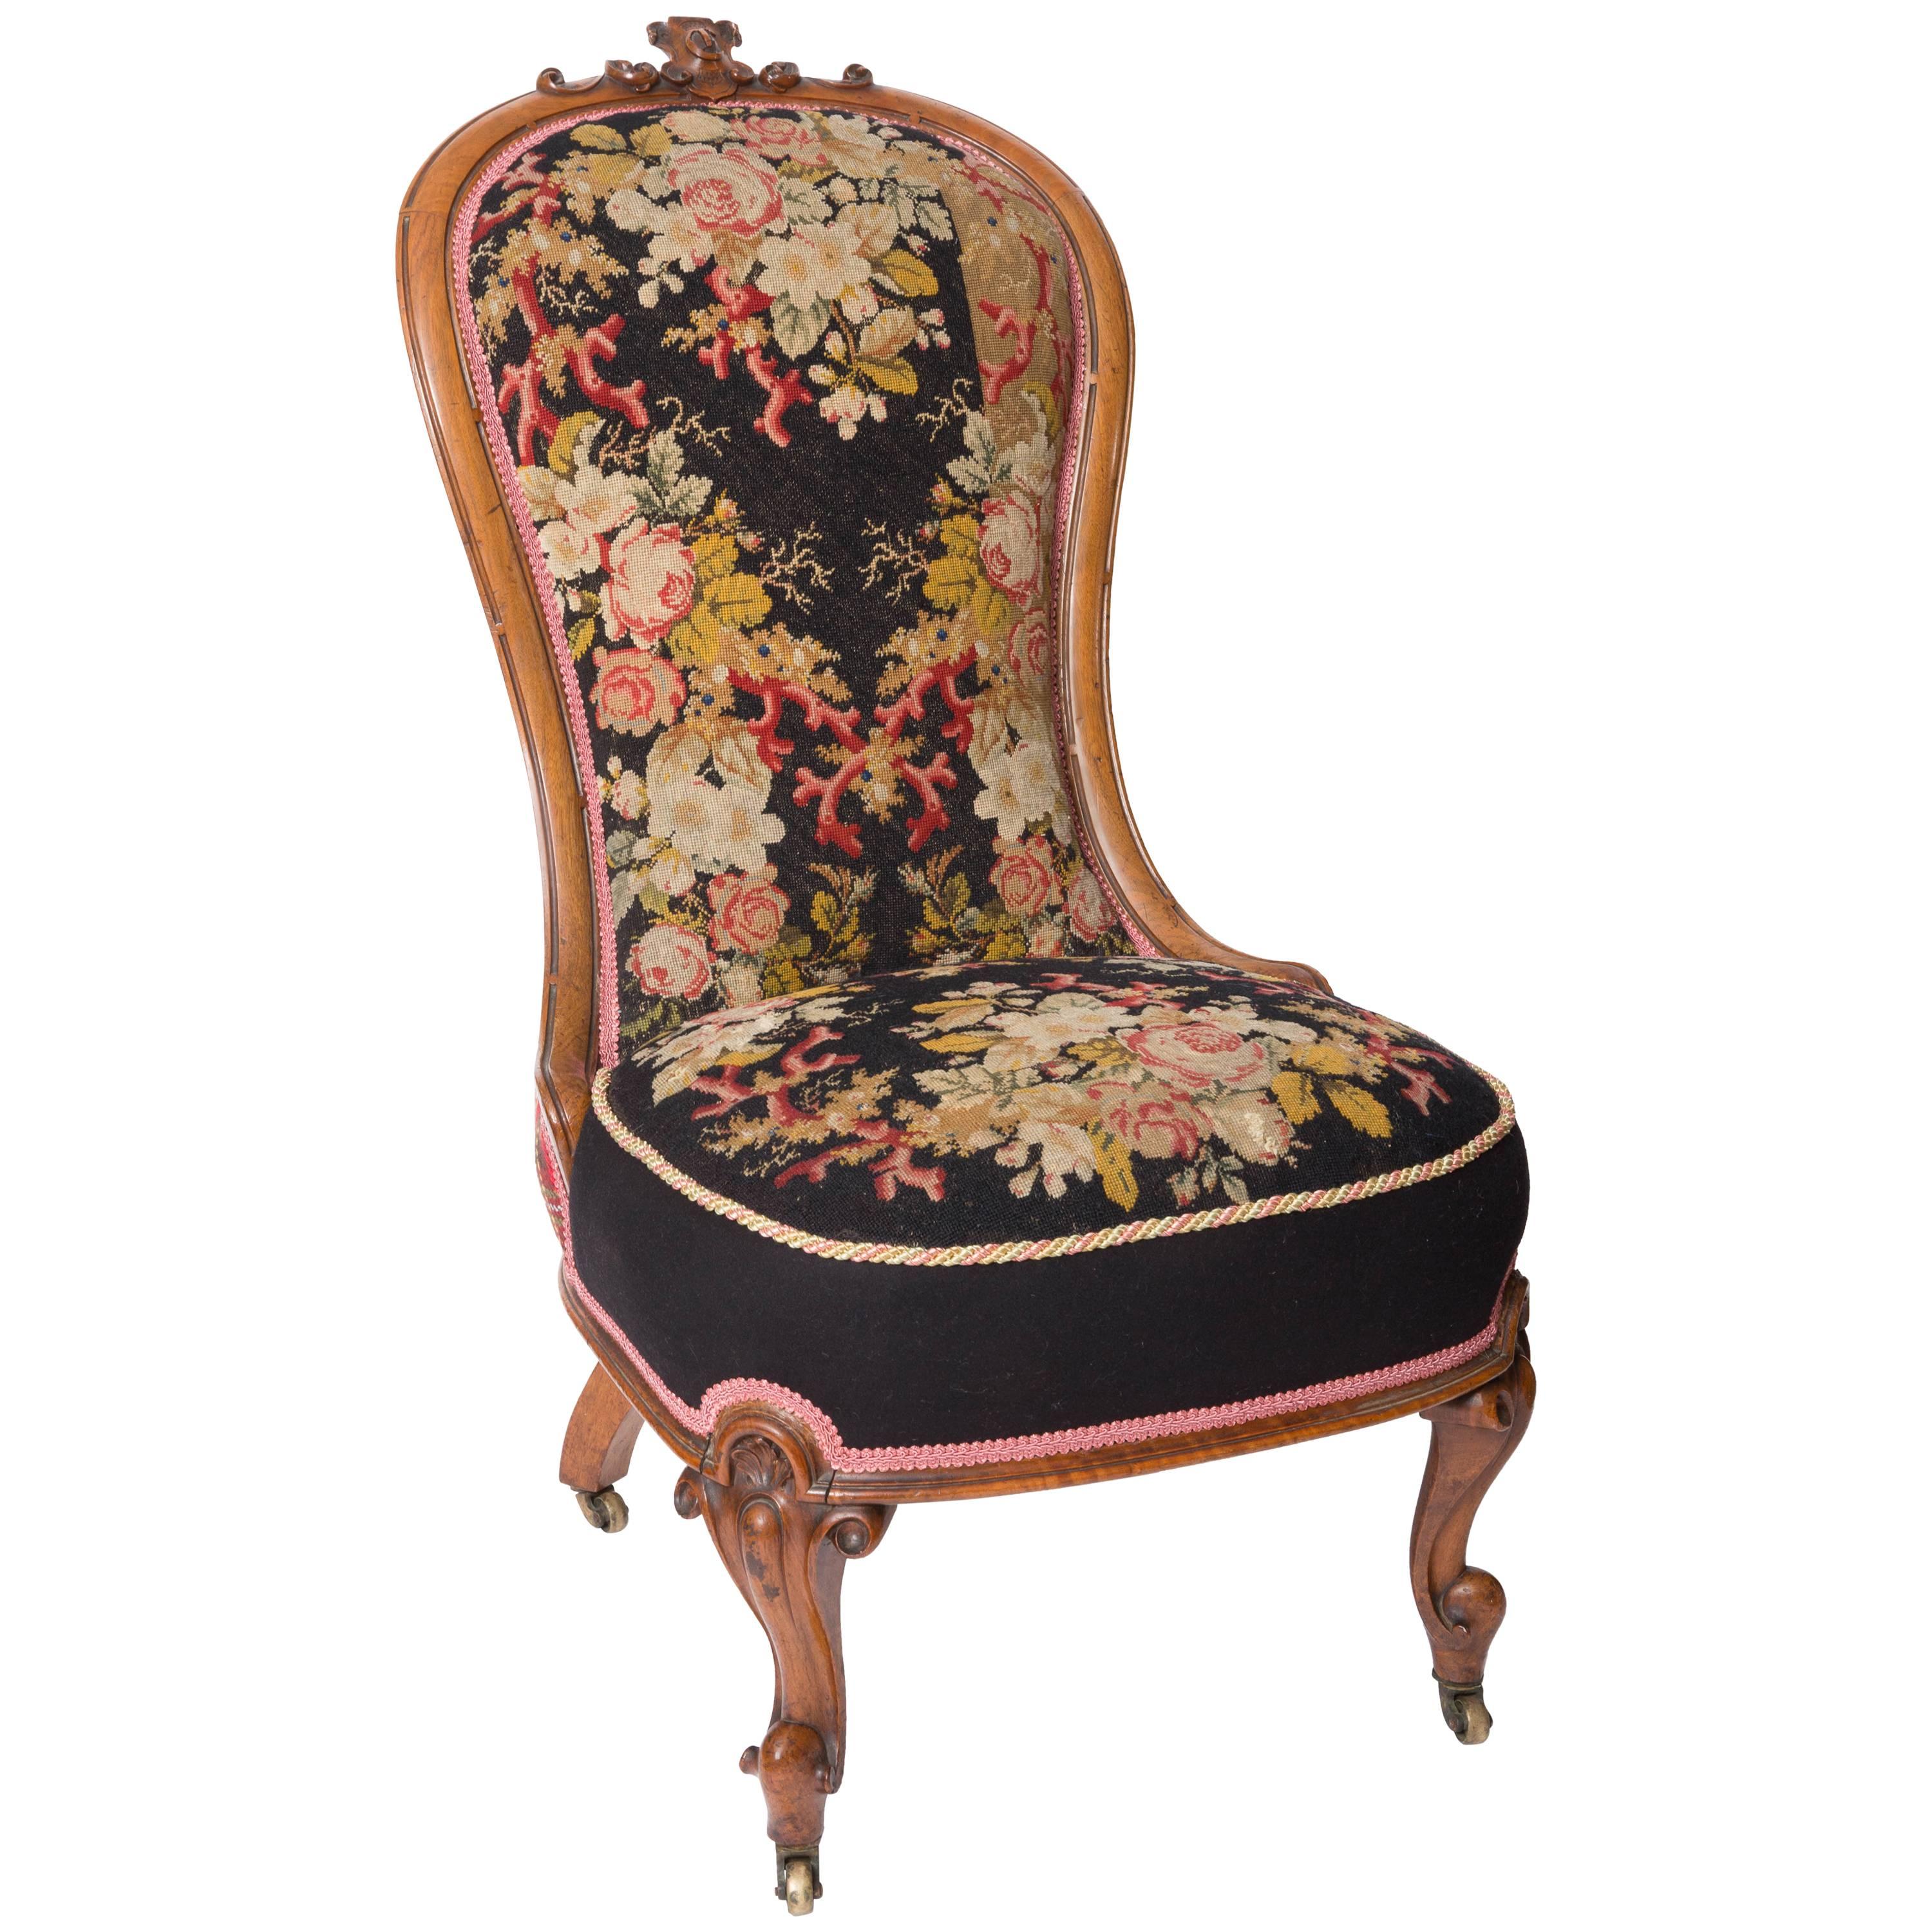 19th Century Needlepoint Upholstered English Slipper Chair For Sale